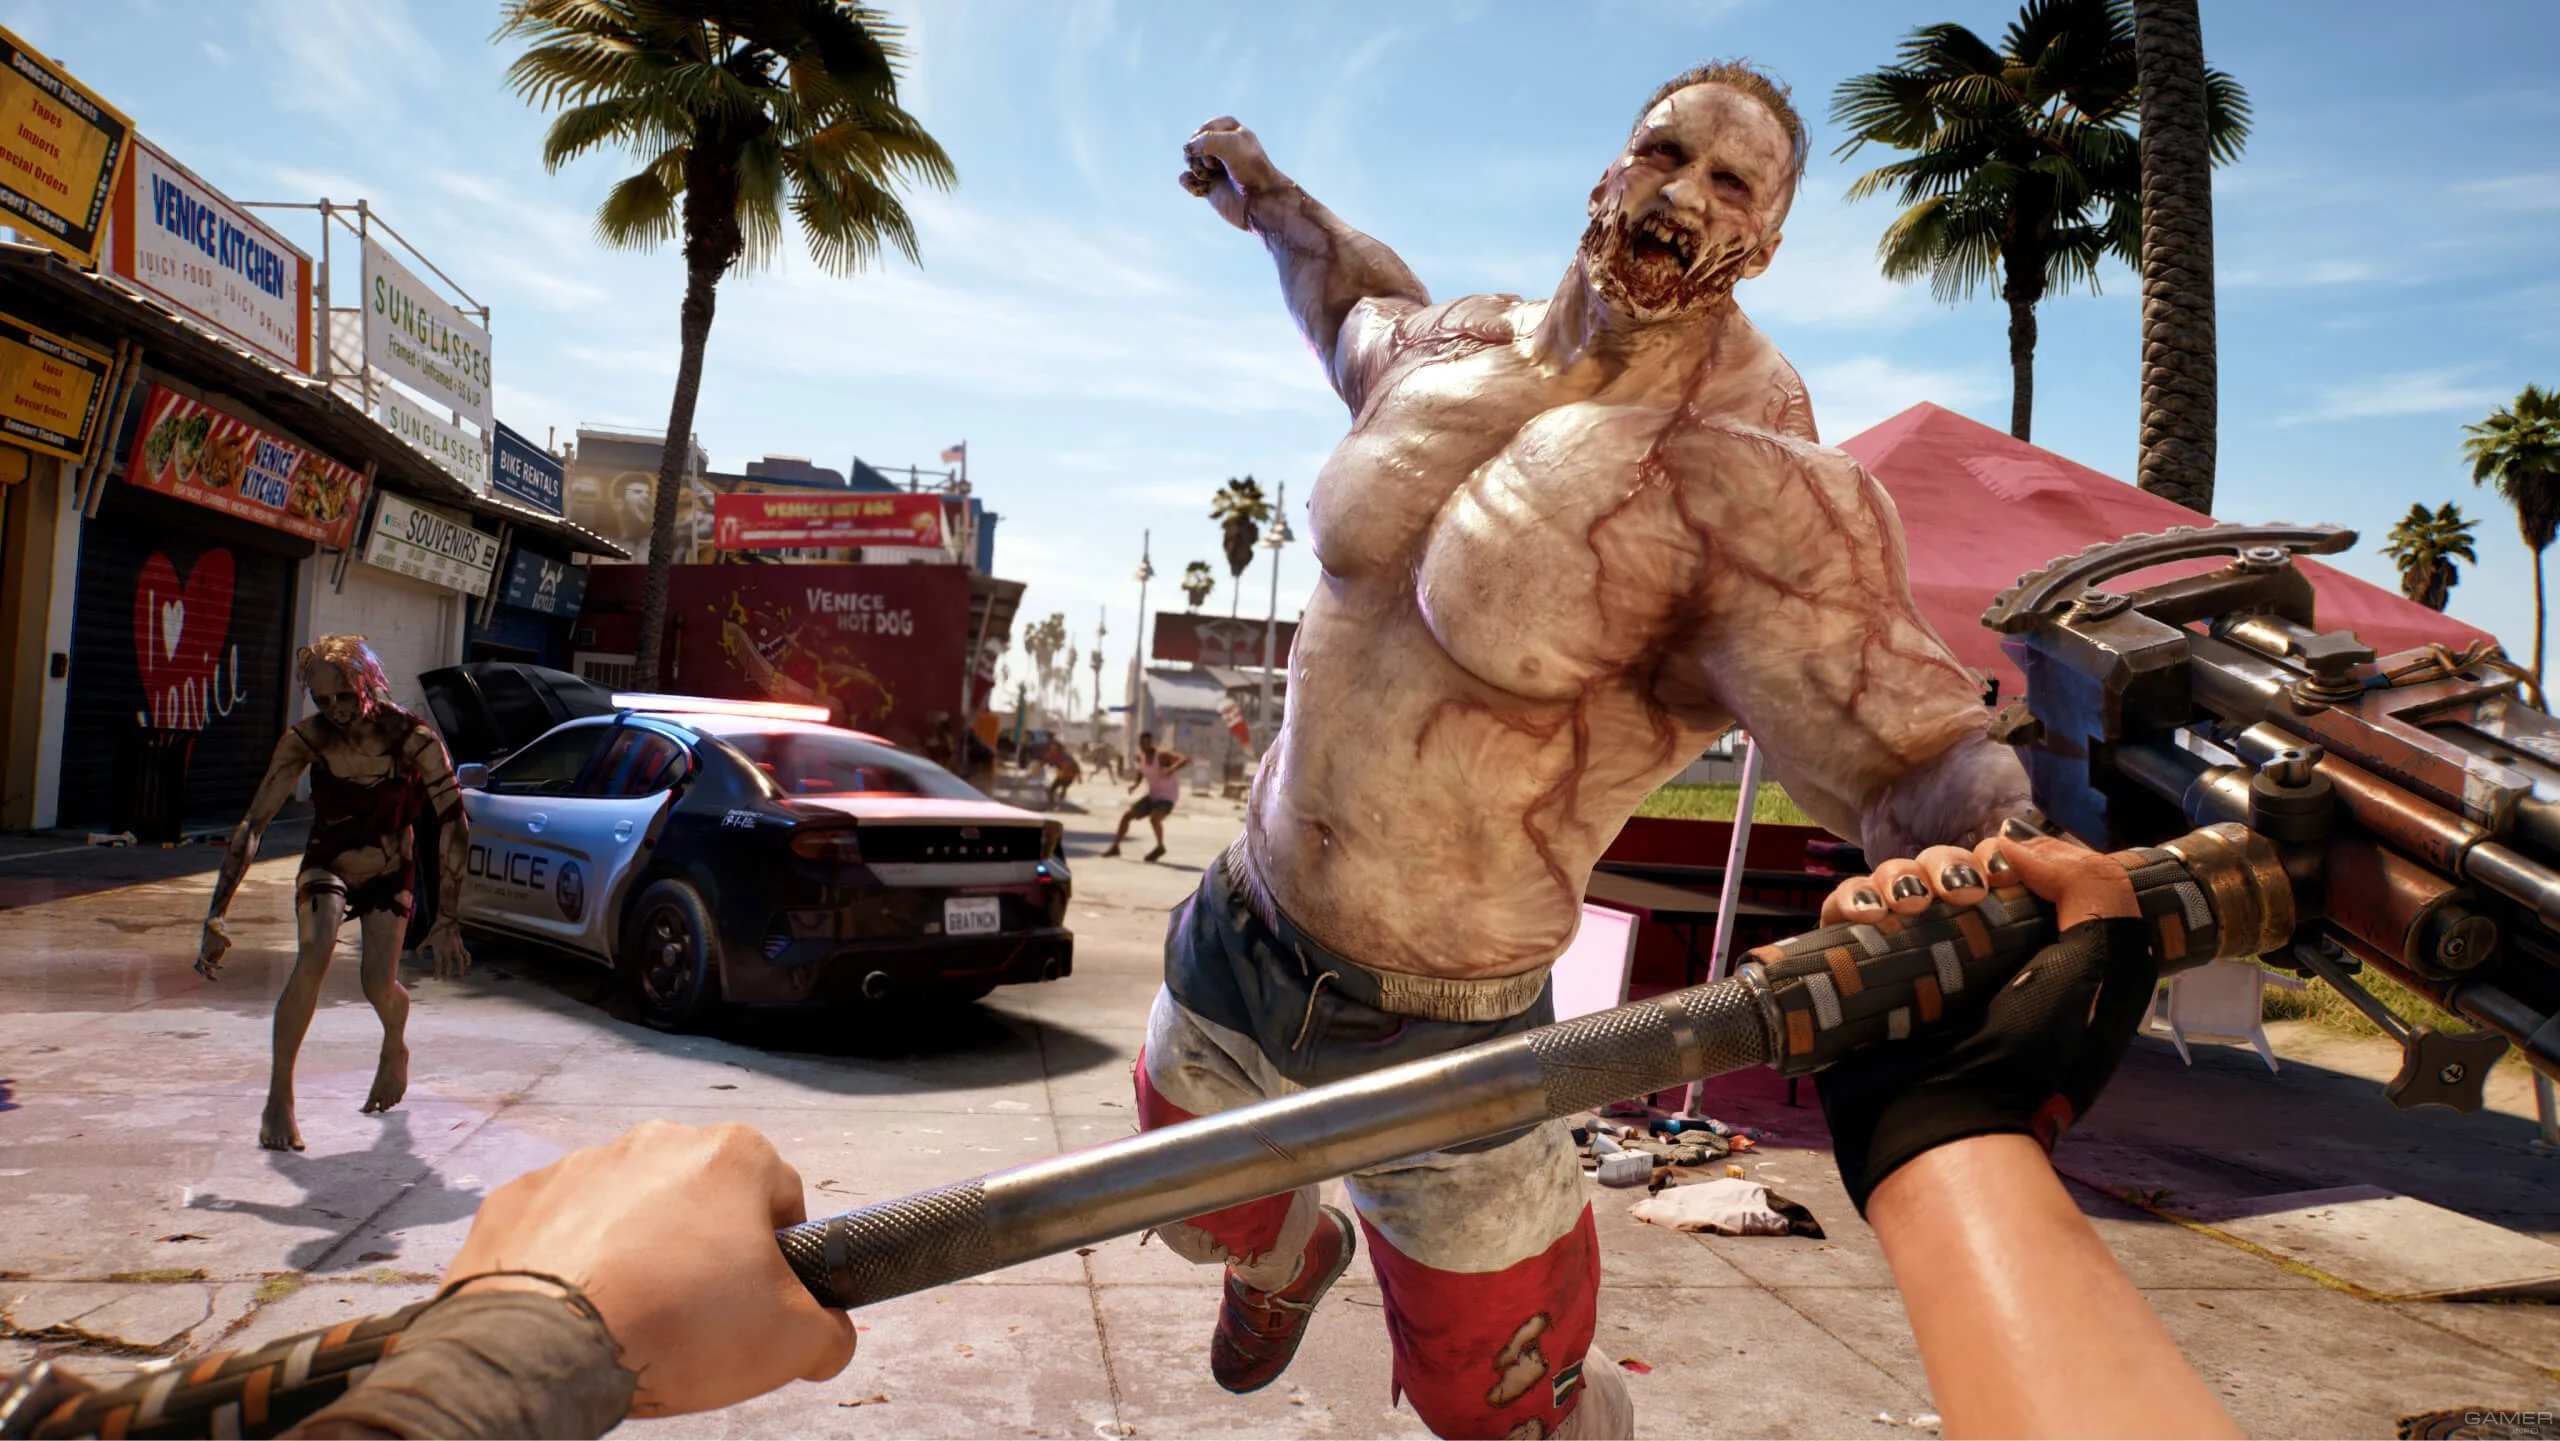 The release trailer for Dead Island 2 showed a particularly tough destruction of zombies